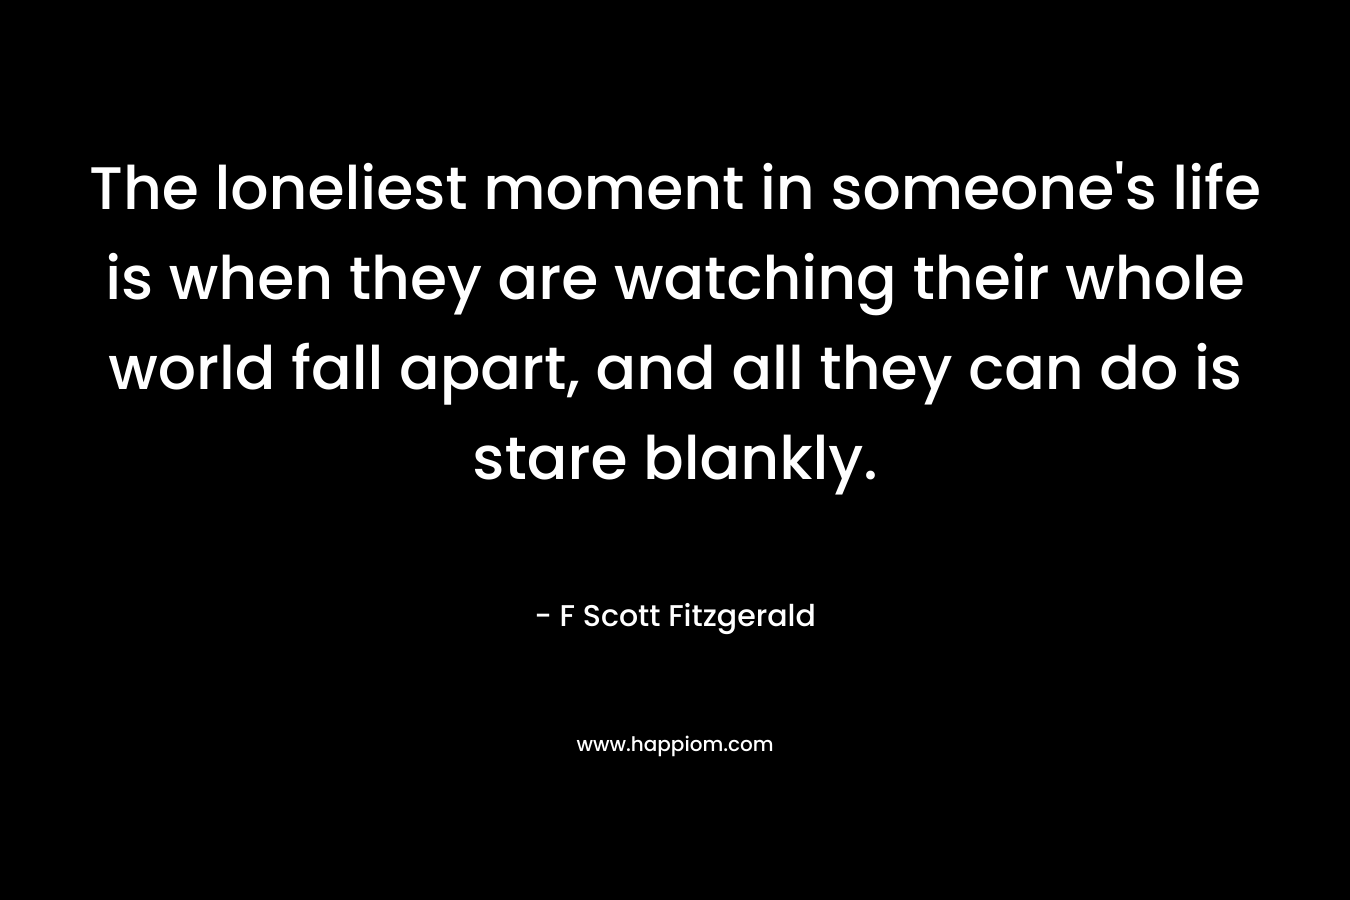 The loneliest moment in someone's life is when they are watching their whole world fall apart, and all they can do is stare blankly.